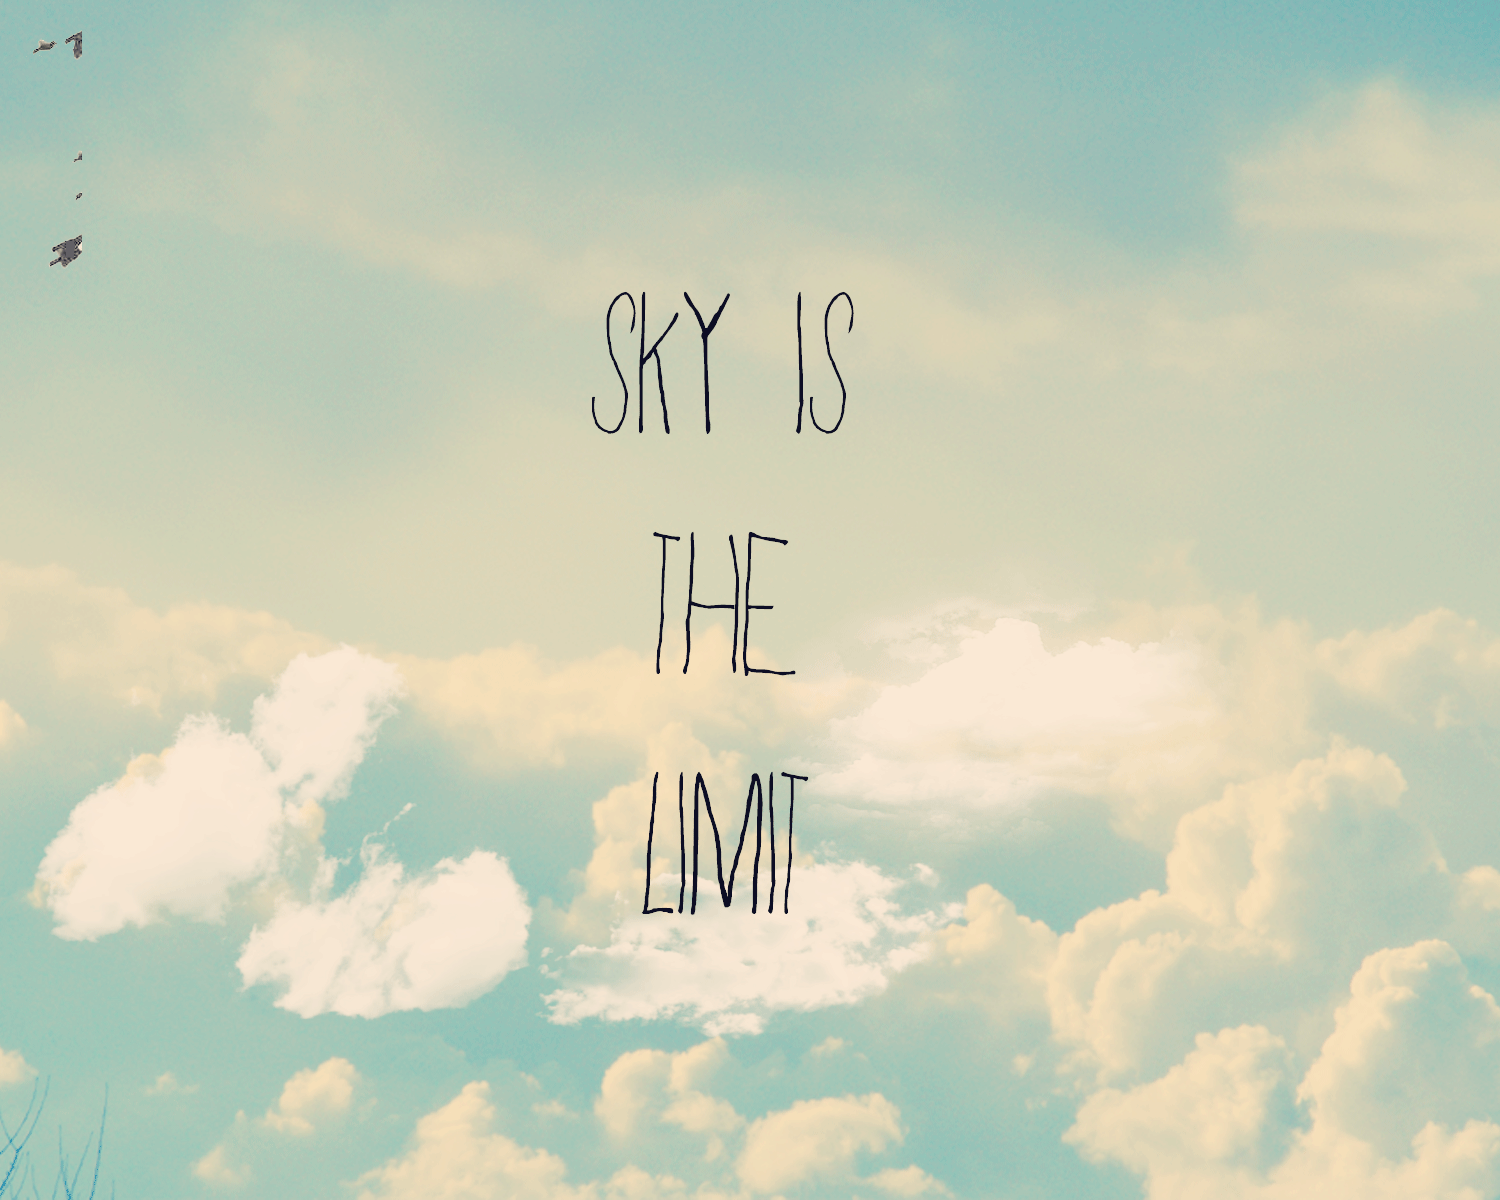 Ис небо. Limits of Sky. The Sky is the limit. Sky in the limit. The Sky is the limit тату.